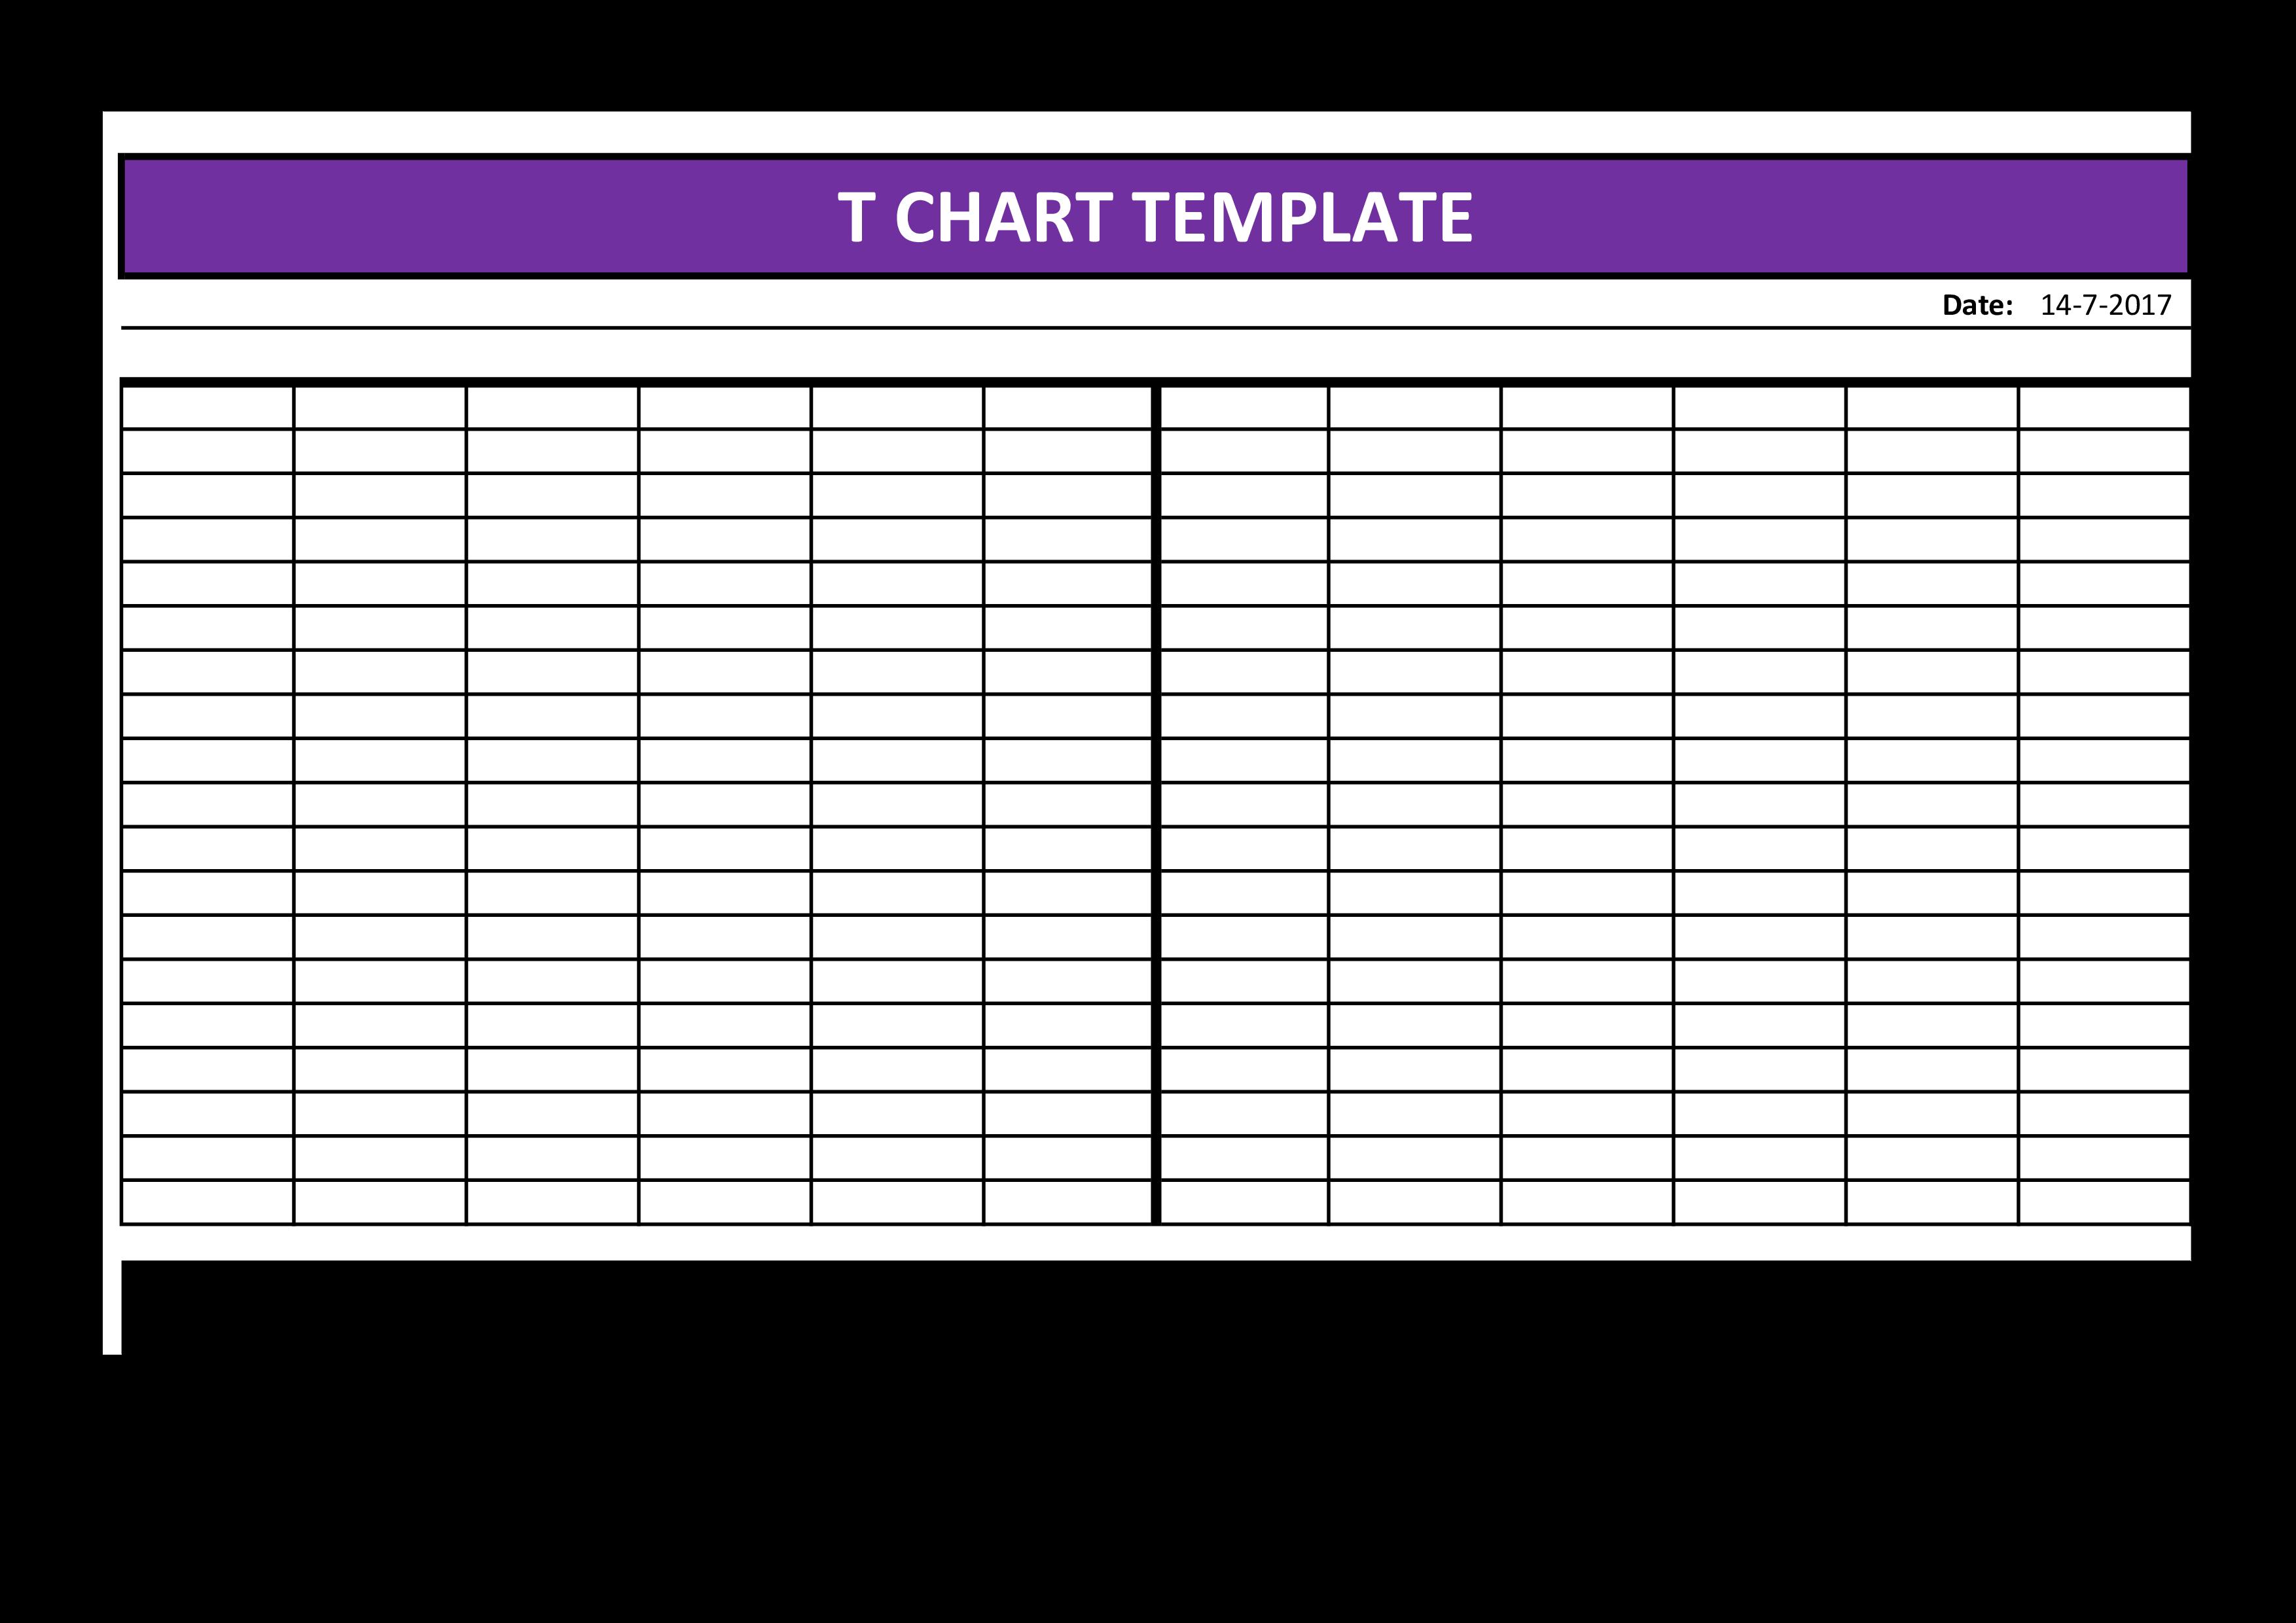 T-Chart template 模板